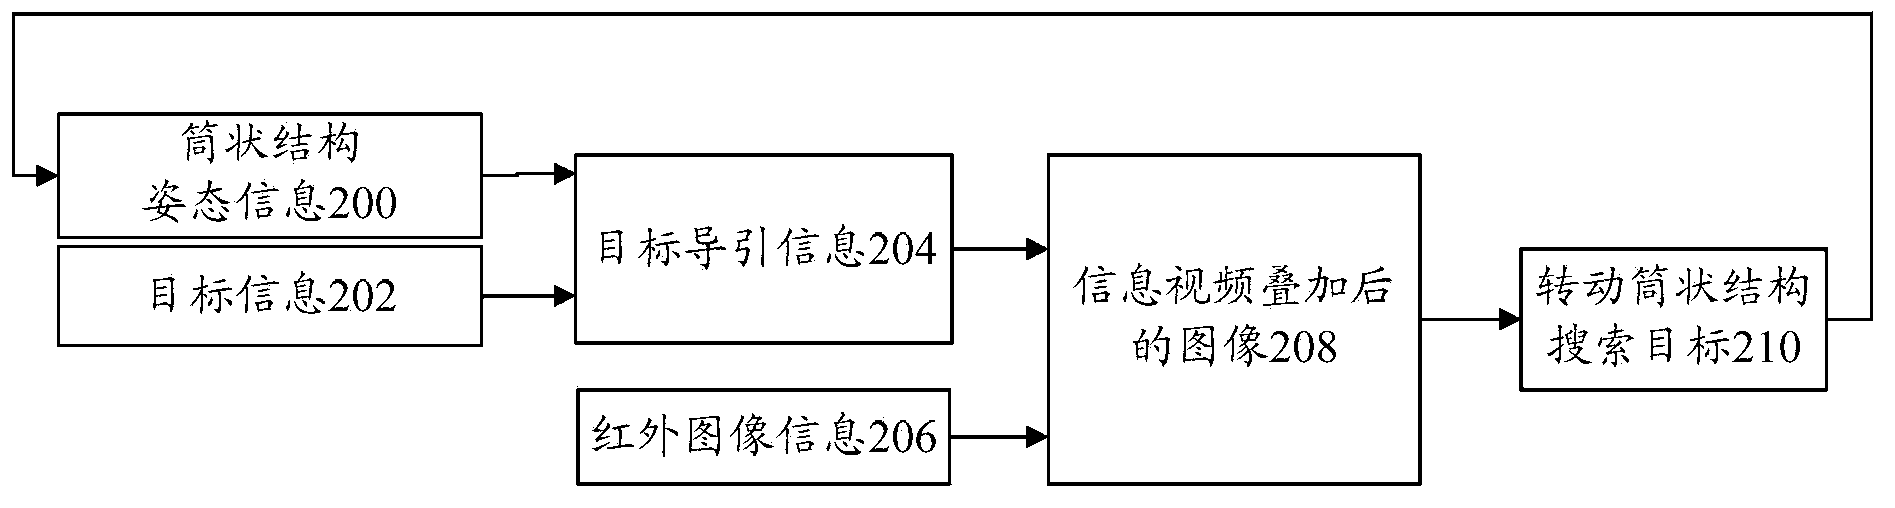 Object guide method and object guide system